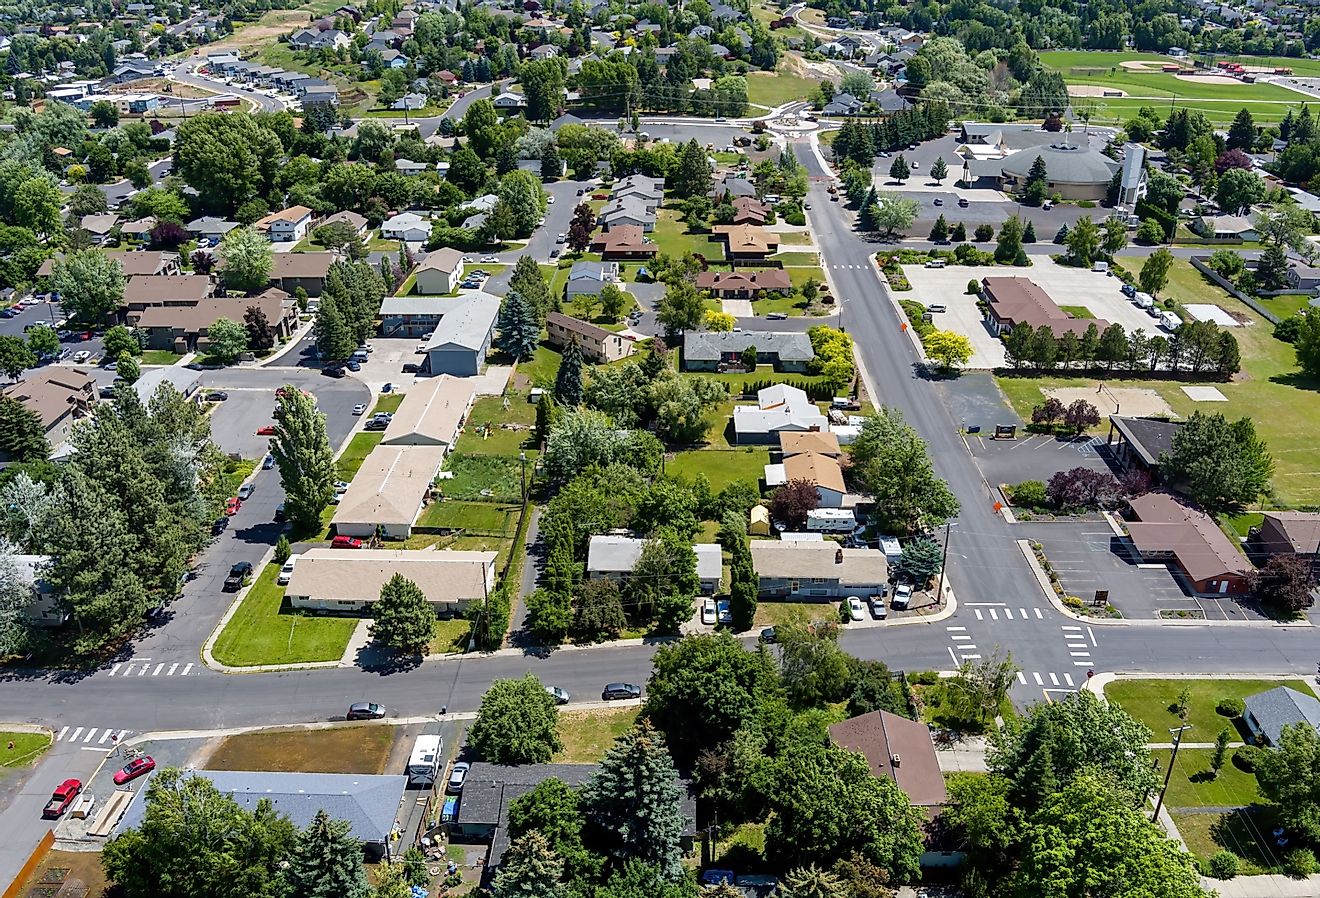 Aerial view of the residential region of Moscow, Idaho